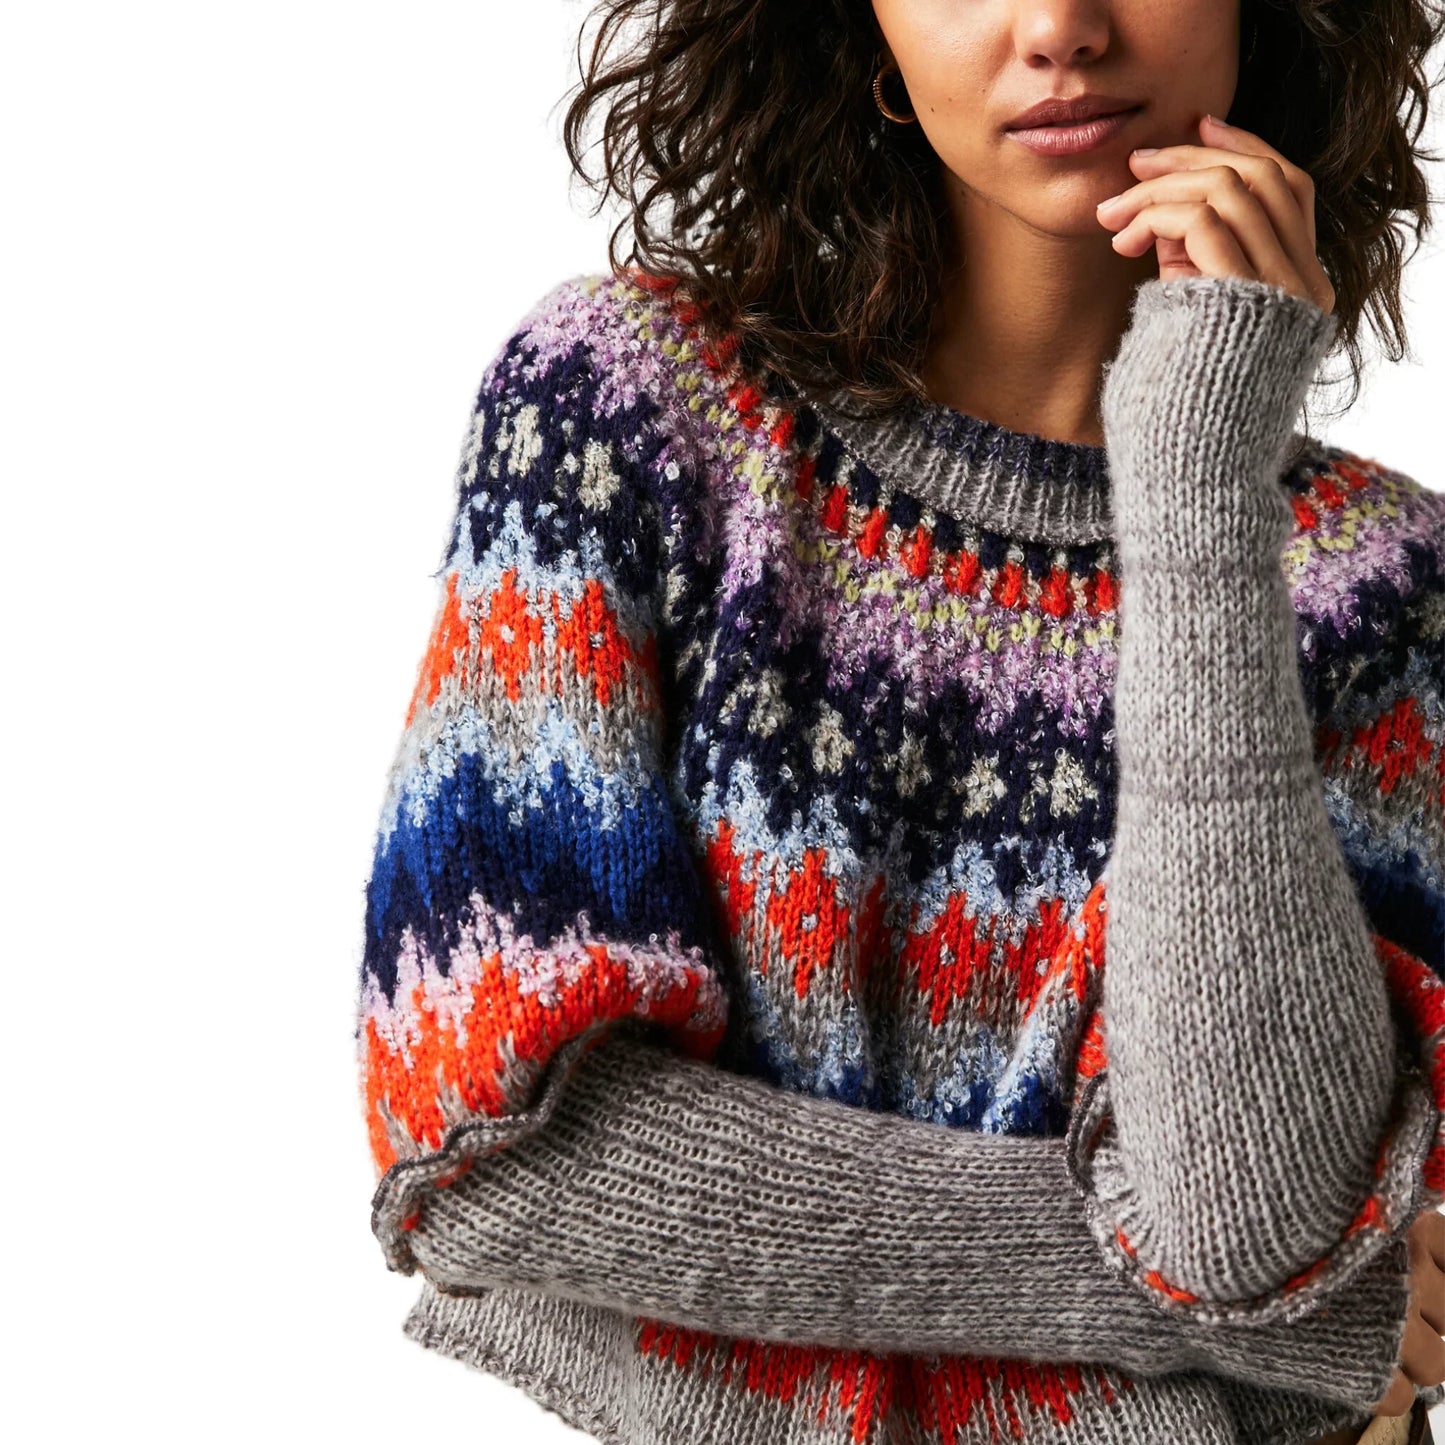 Home for the Holidays Sweater - Madison's Niche 